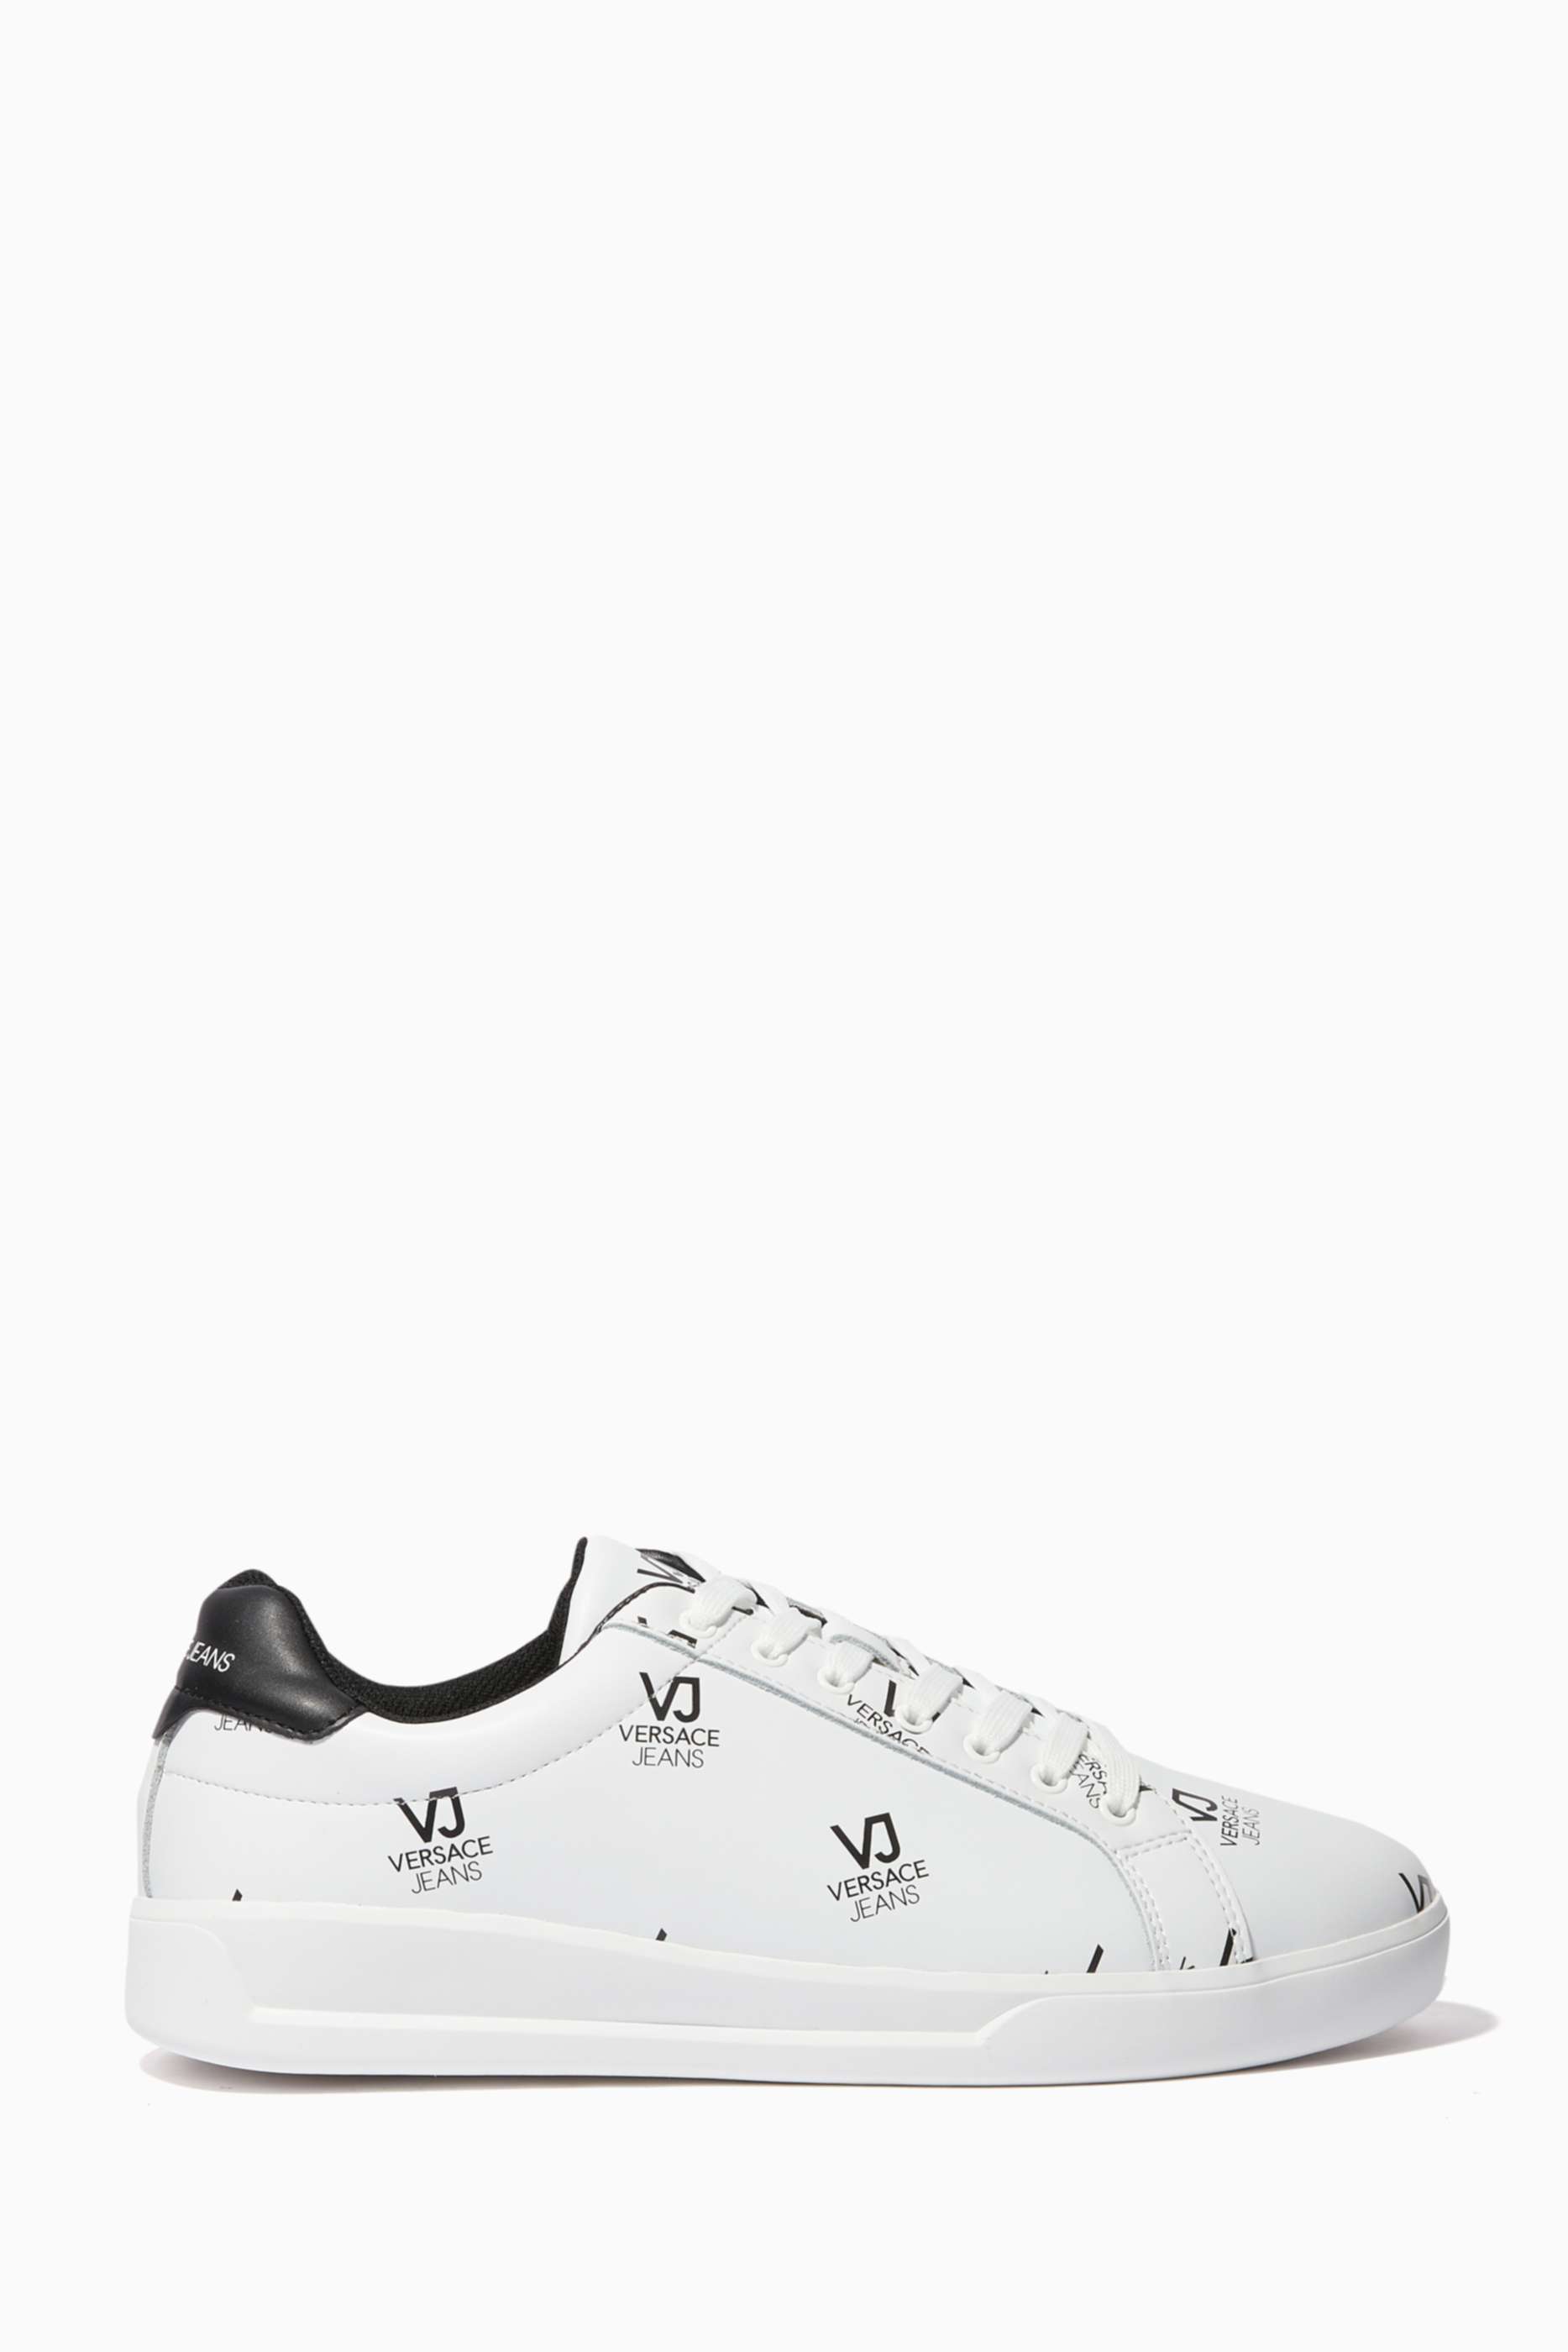 versace jeans trainers mens